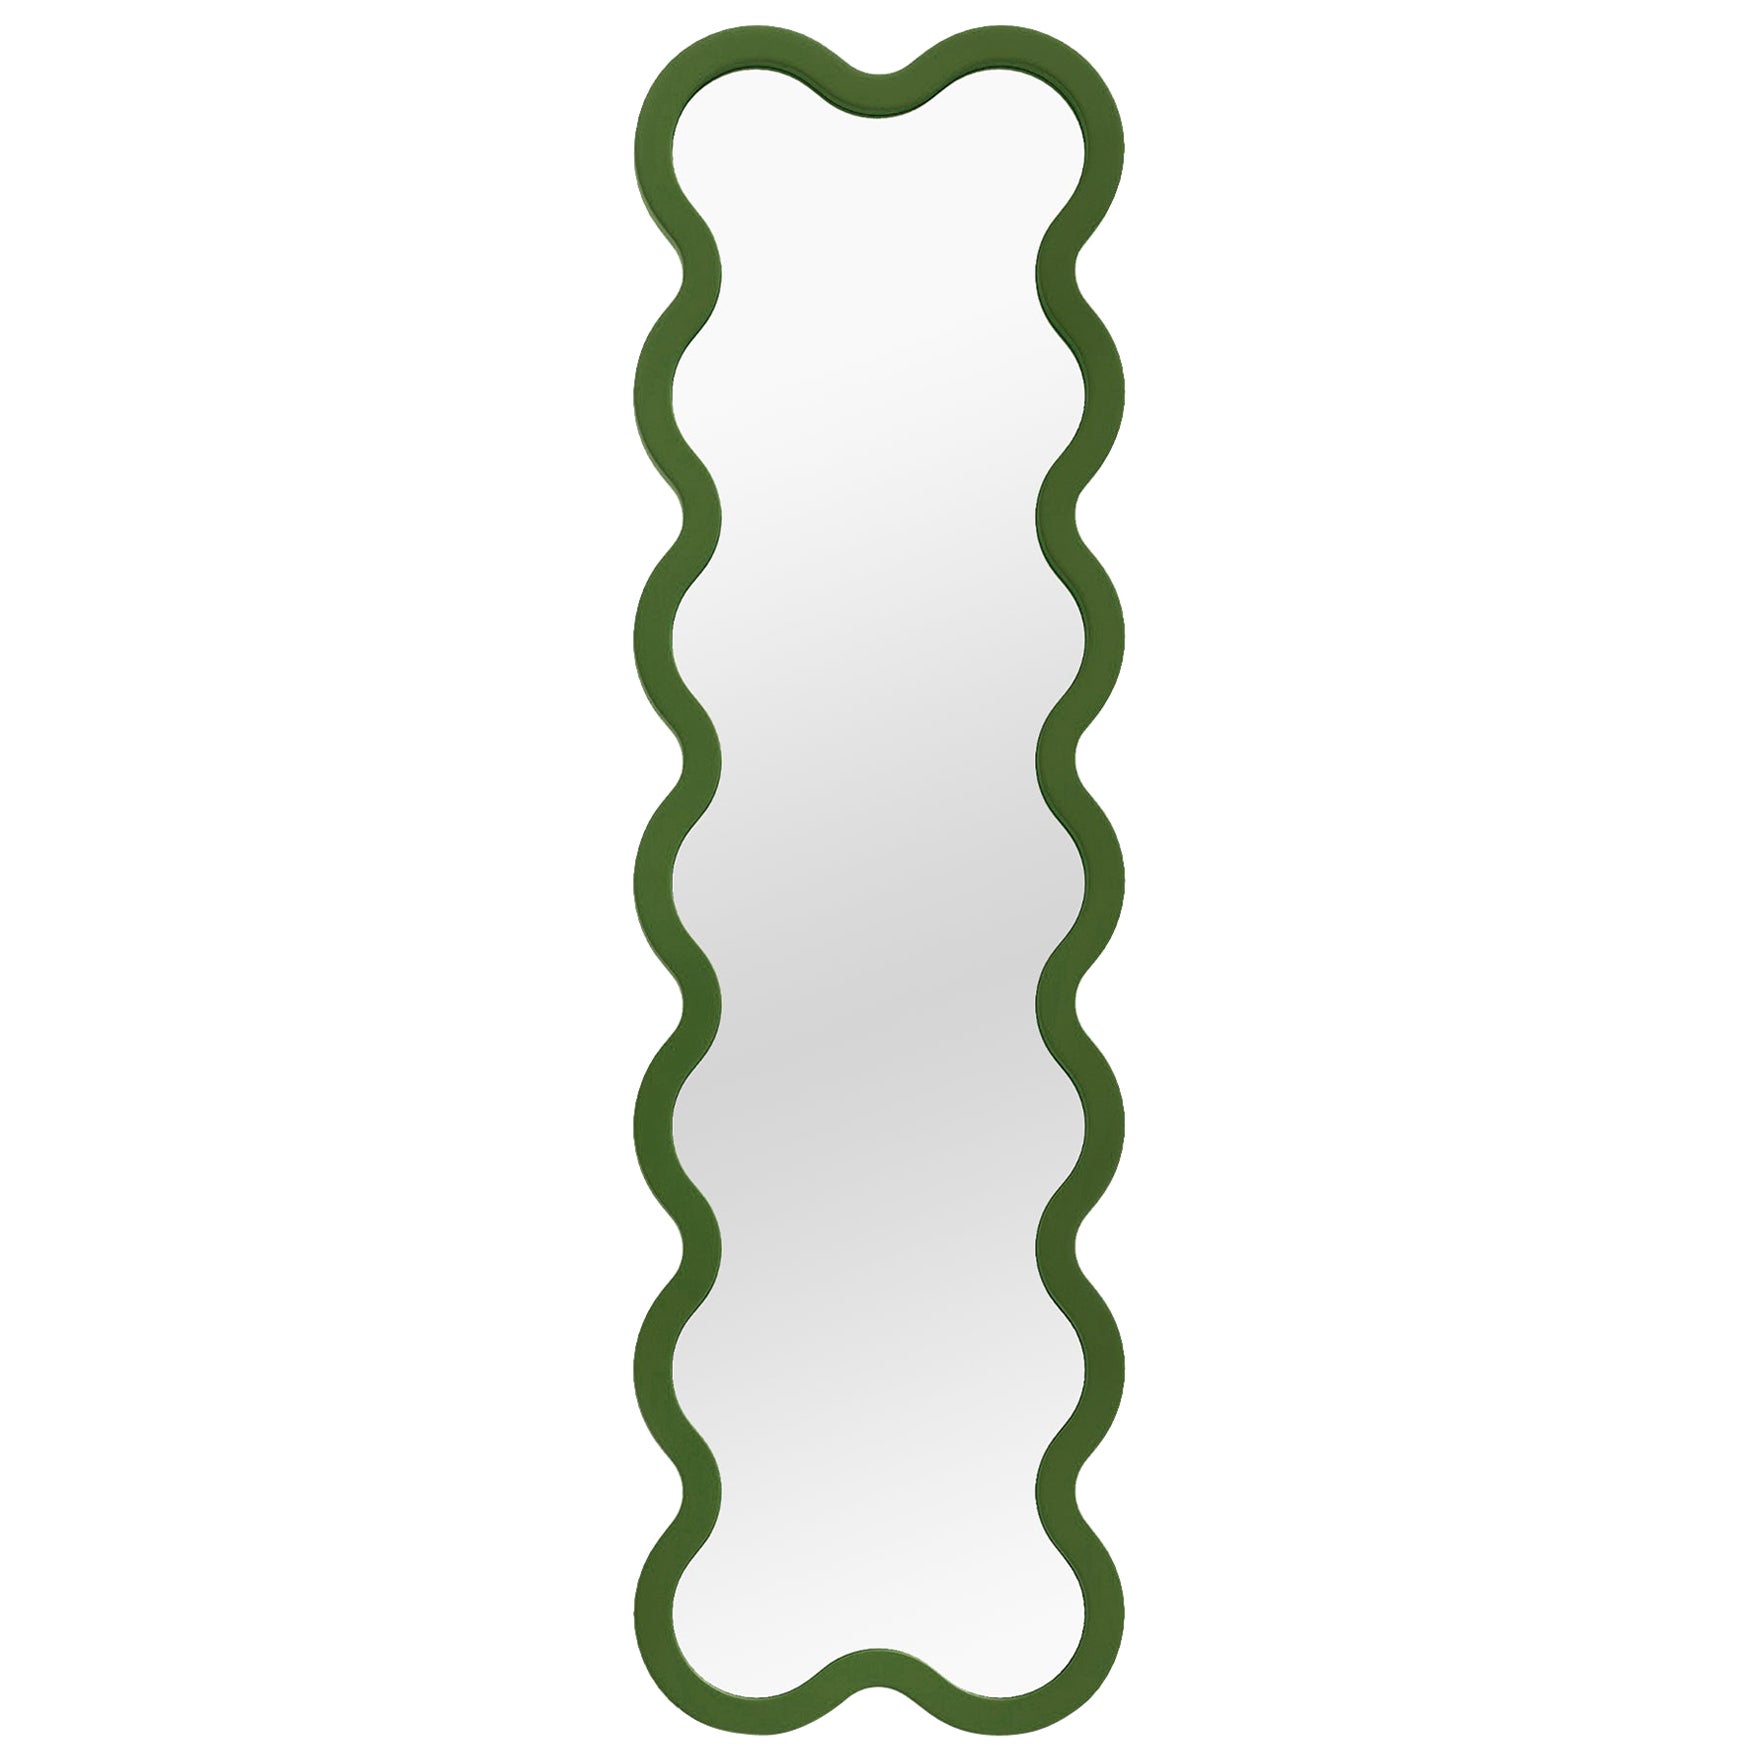 Contemporary Mirror 'Hvyli 14' by Oitoproducts, Green Frame For Sale